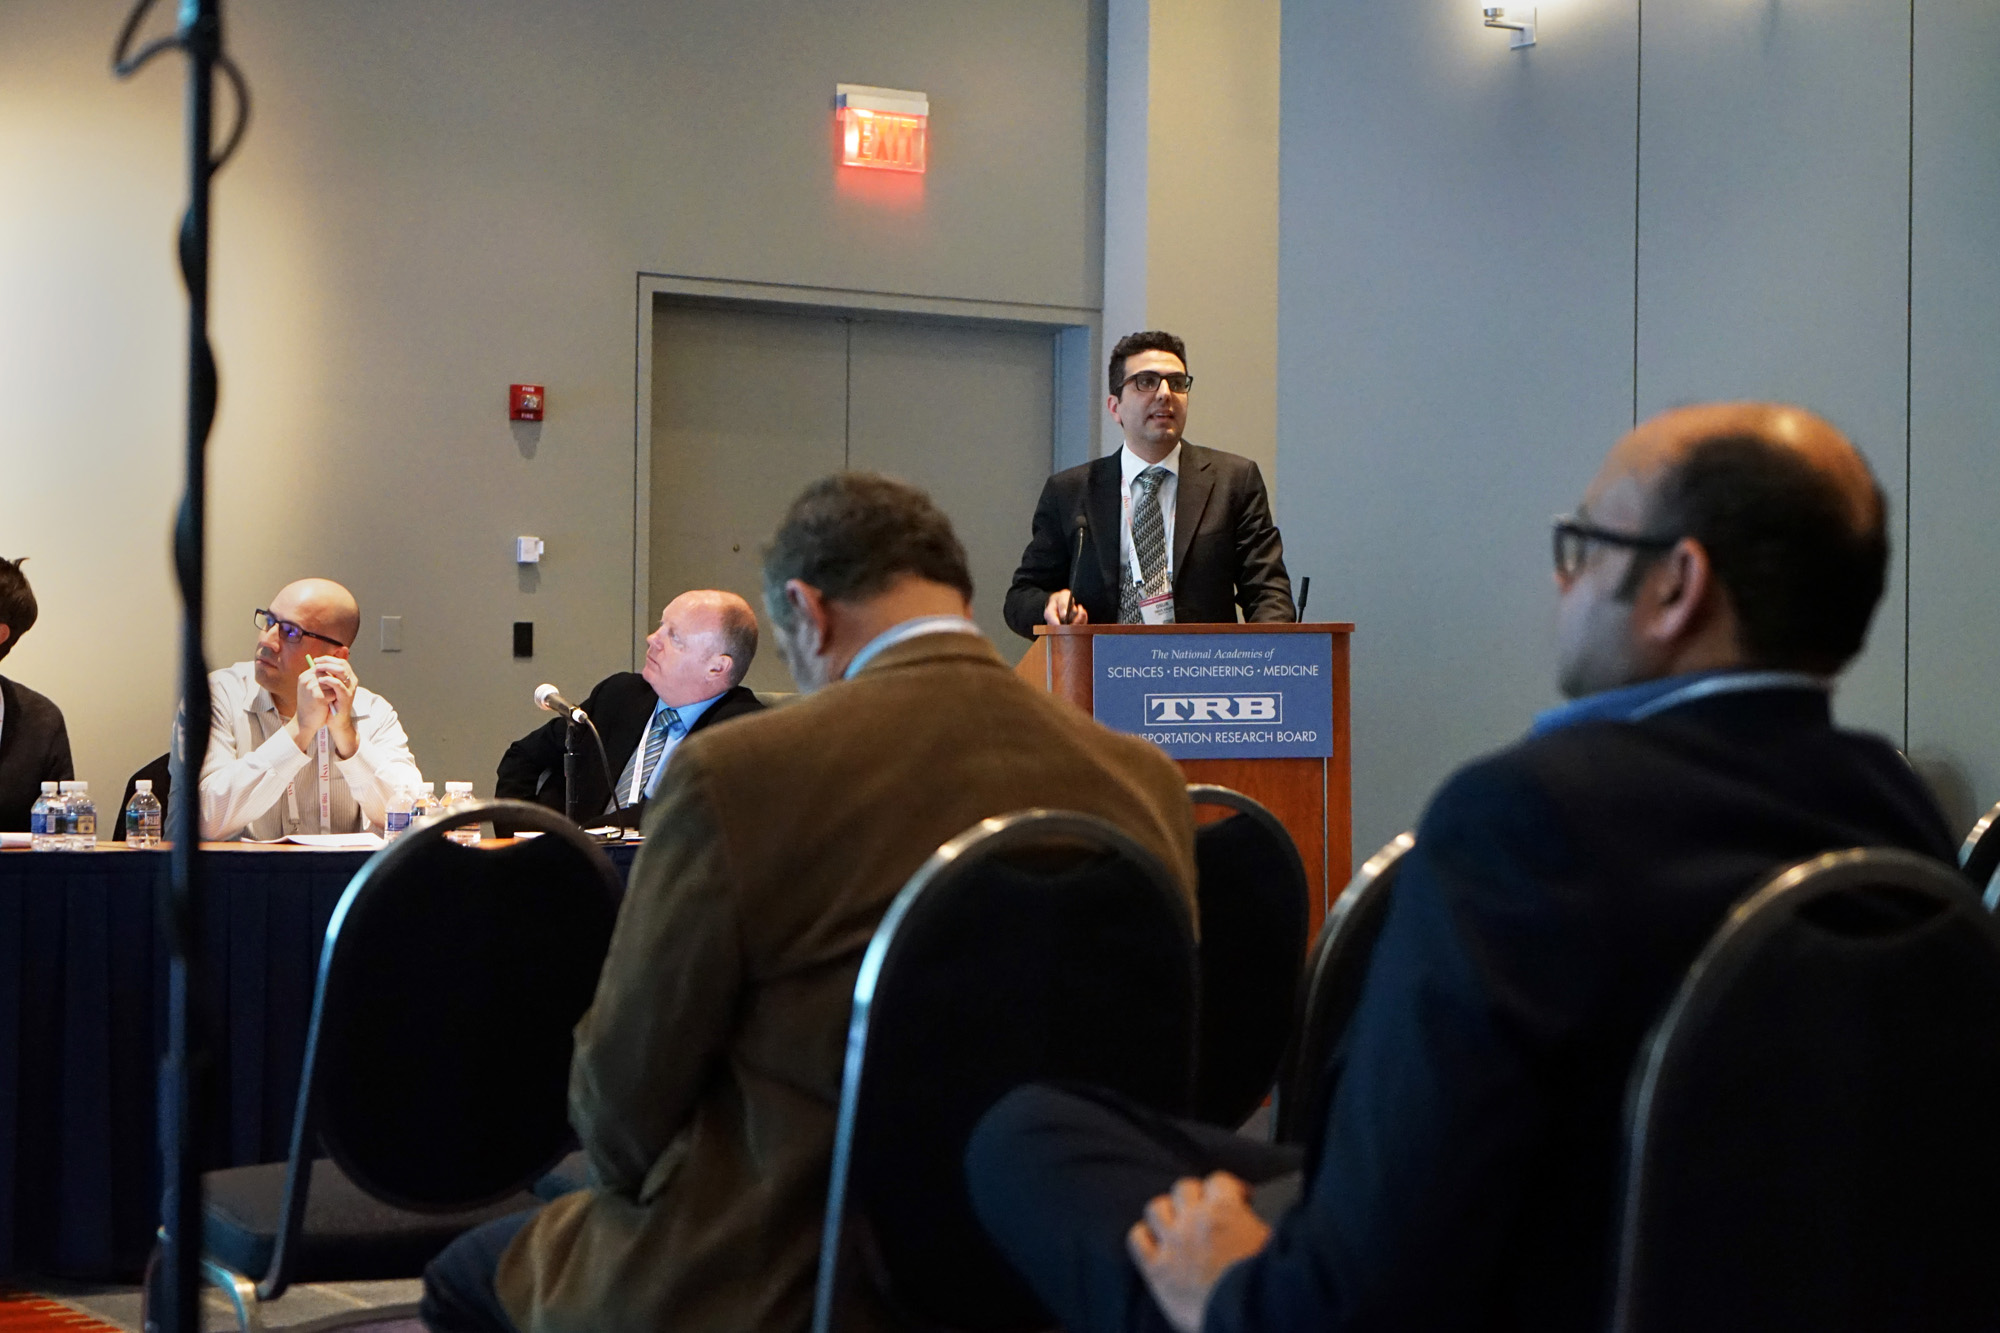 Postdoctoral researcher Onur Kalan presents during a lectern session at TRB.